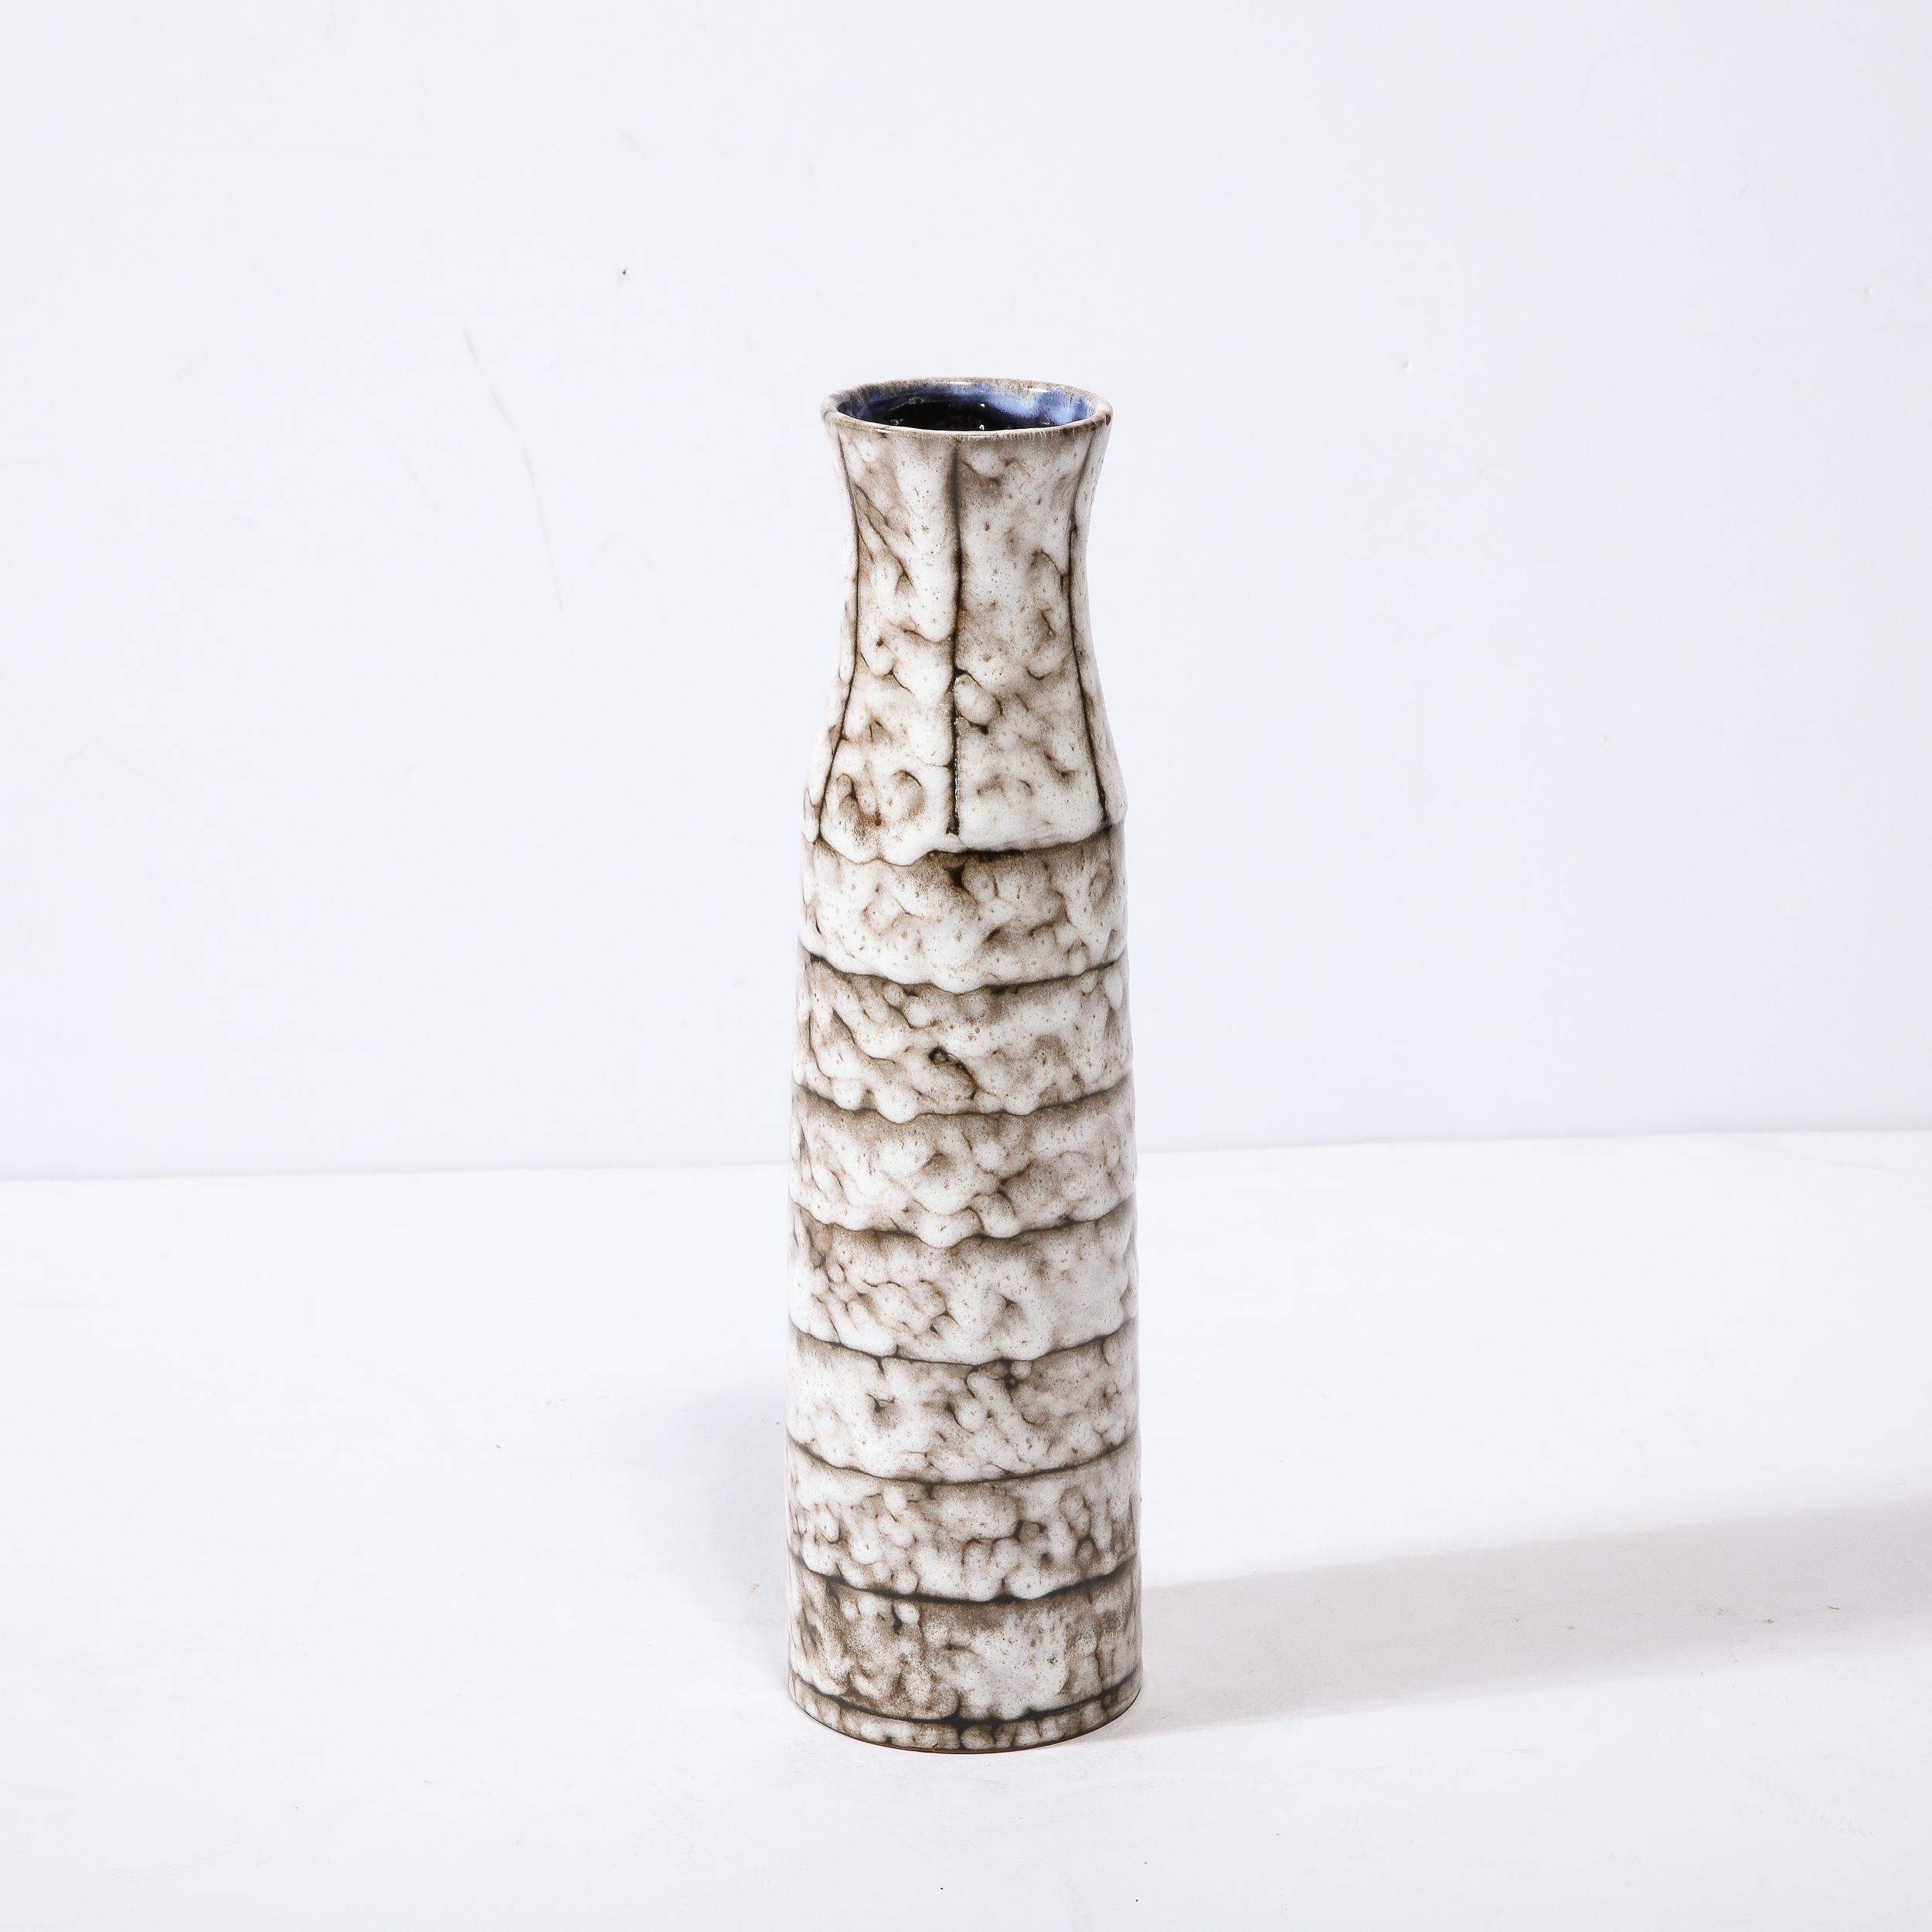 This Mid-Century Modernist ceramic vase with banded detailing is a beautiful example of Post War European Ceramics, realized in Hódmezovasarhely Majolikagyár, Hungary Circa 1960. With a Stunning textural finish composed in Cream White and Blackened